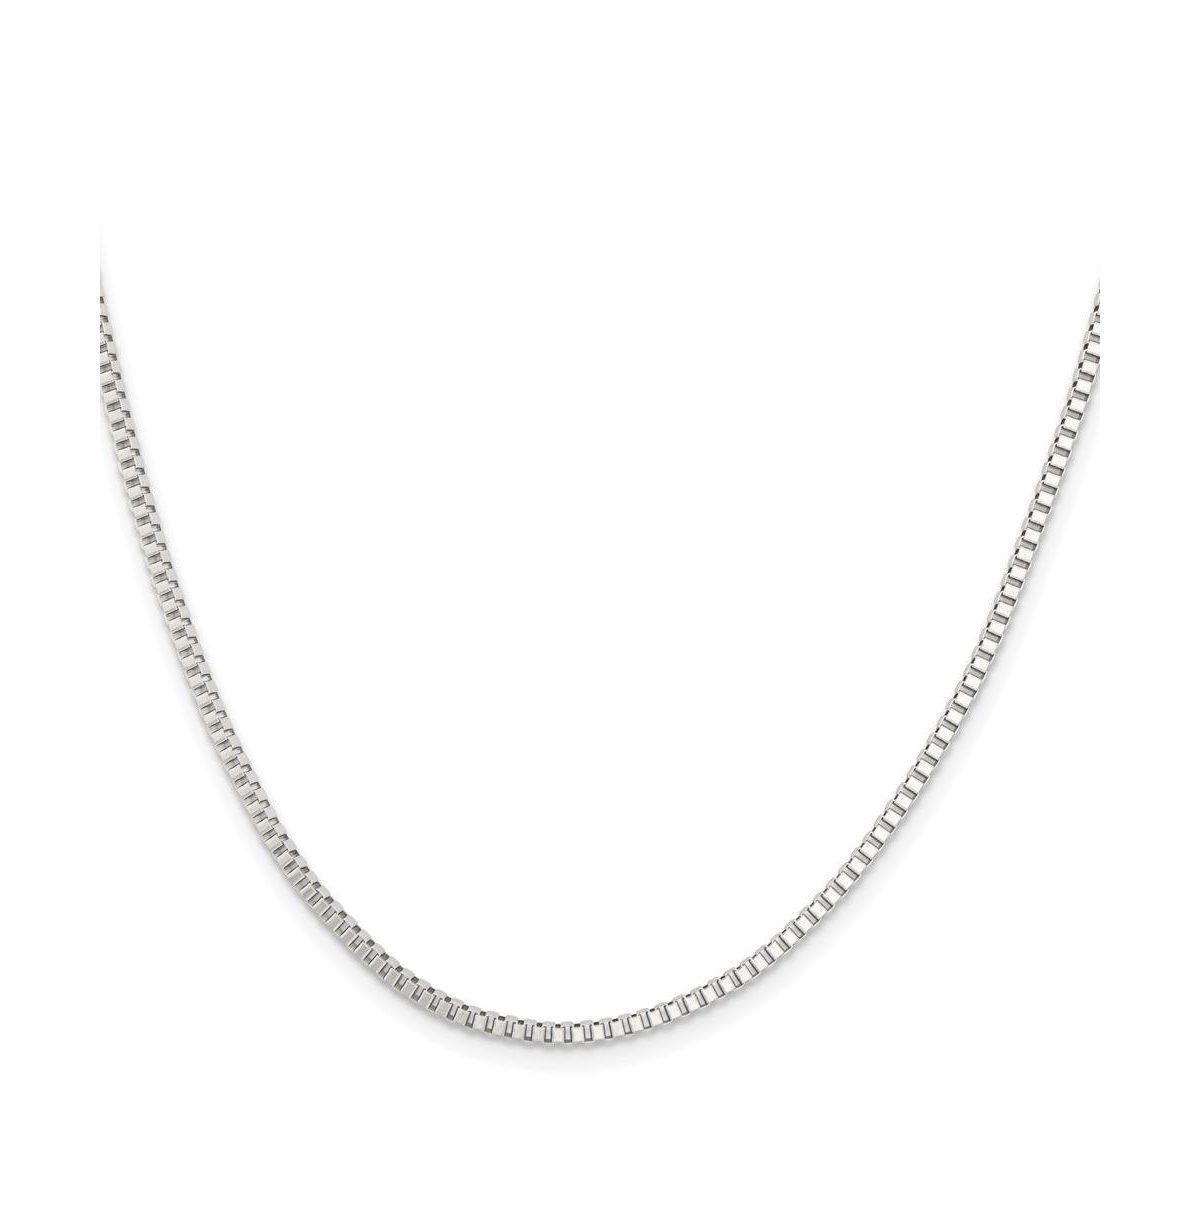 Stainless Steel Polished 2mm Box Chain Necklace - Silver